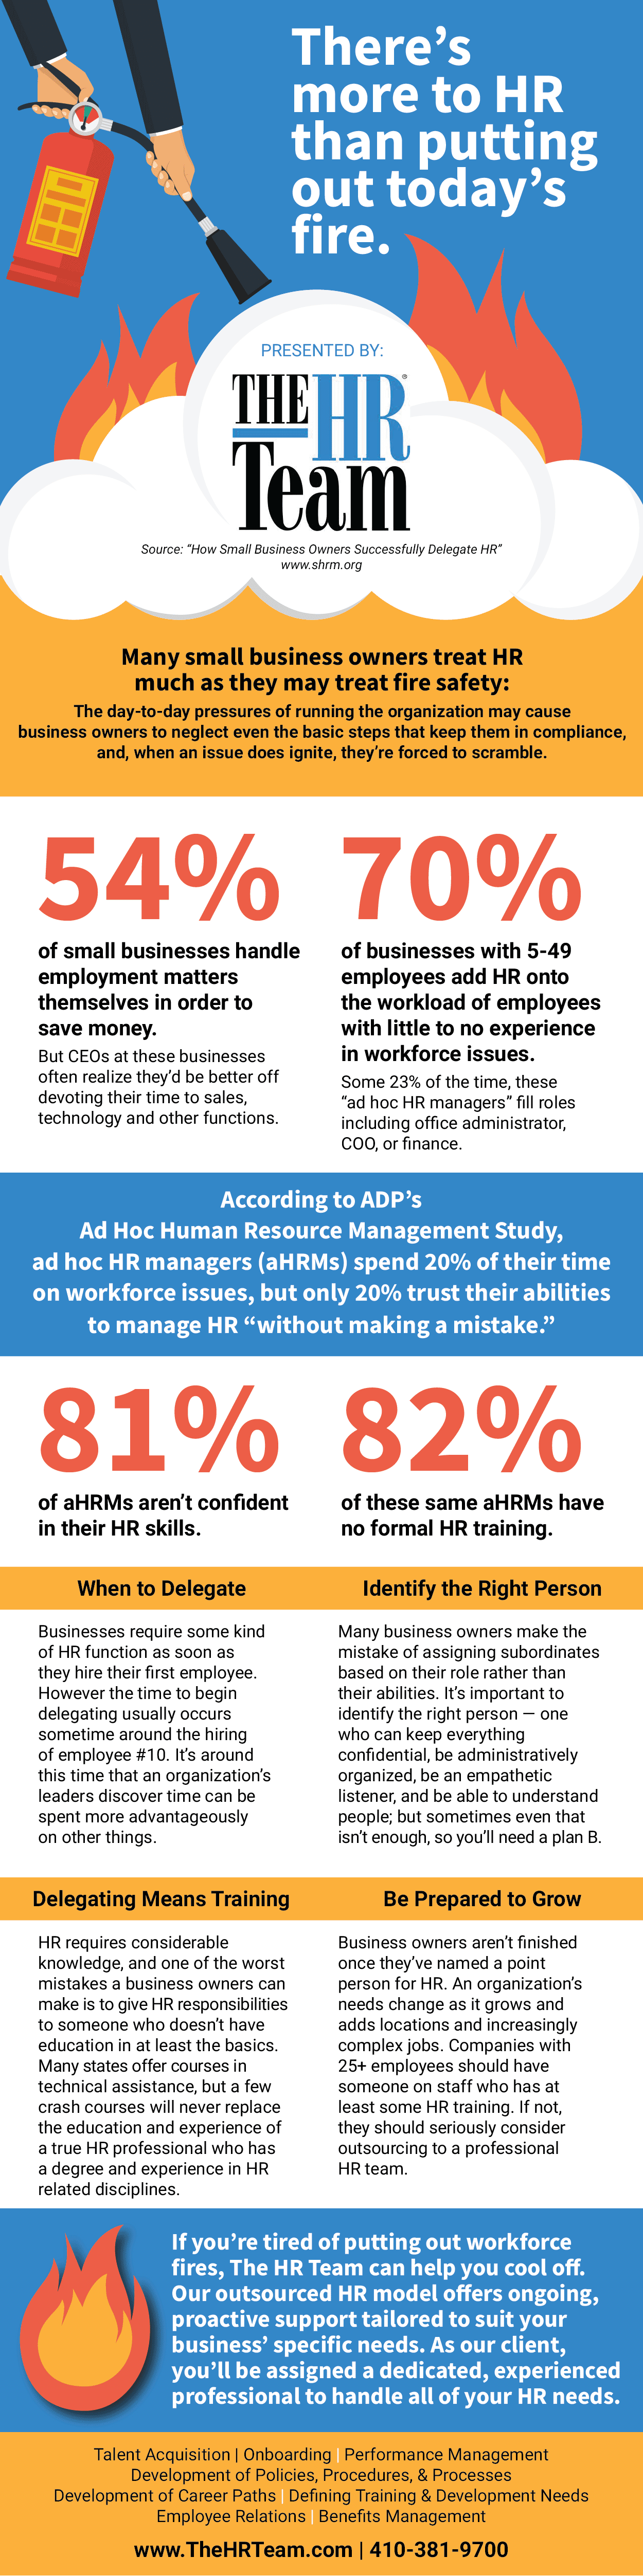 The HR Team-There's more to HR than putting out today's fire